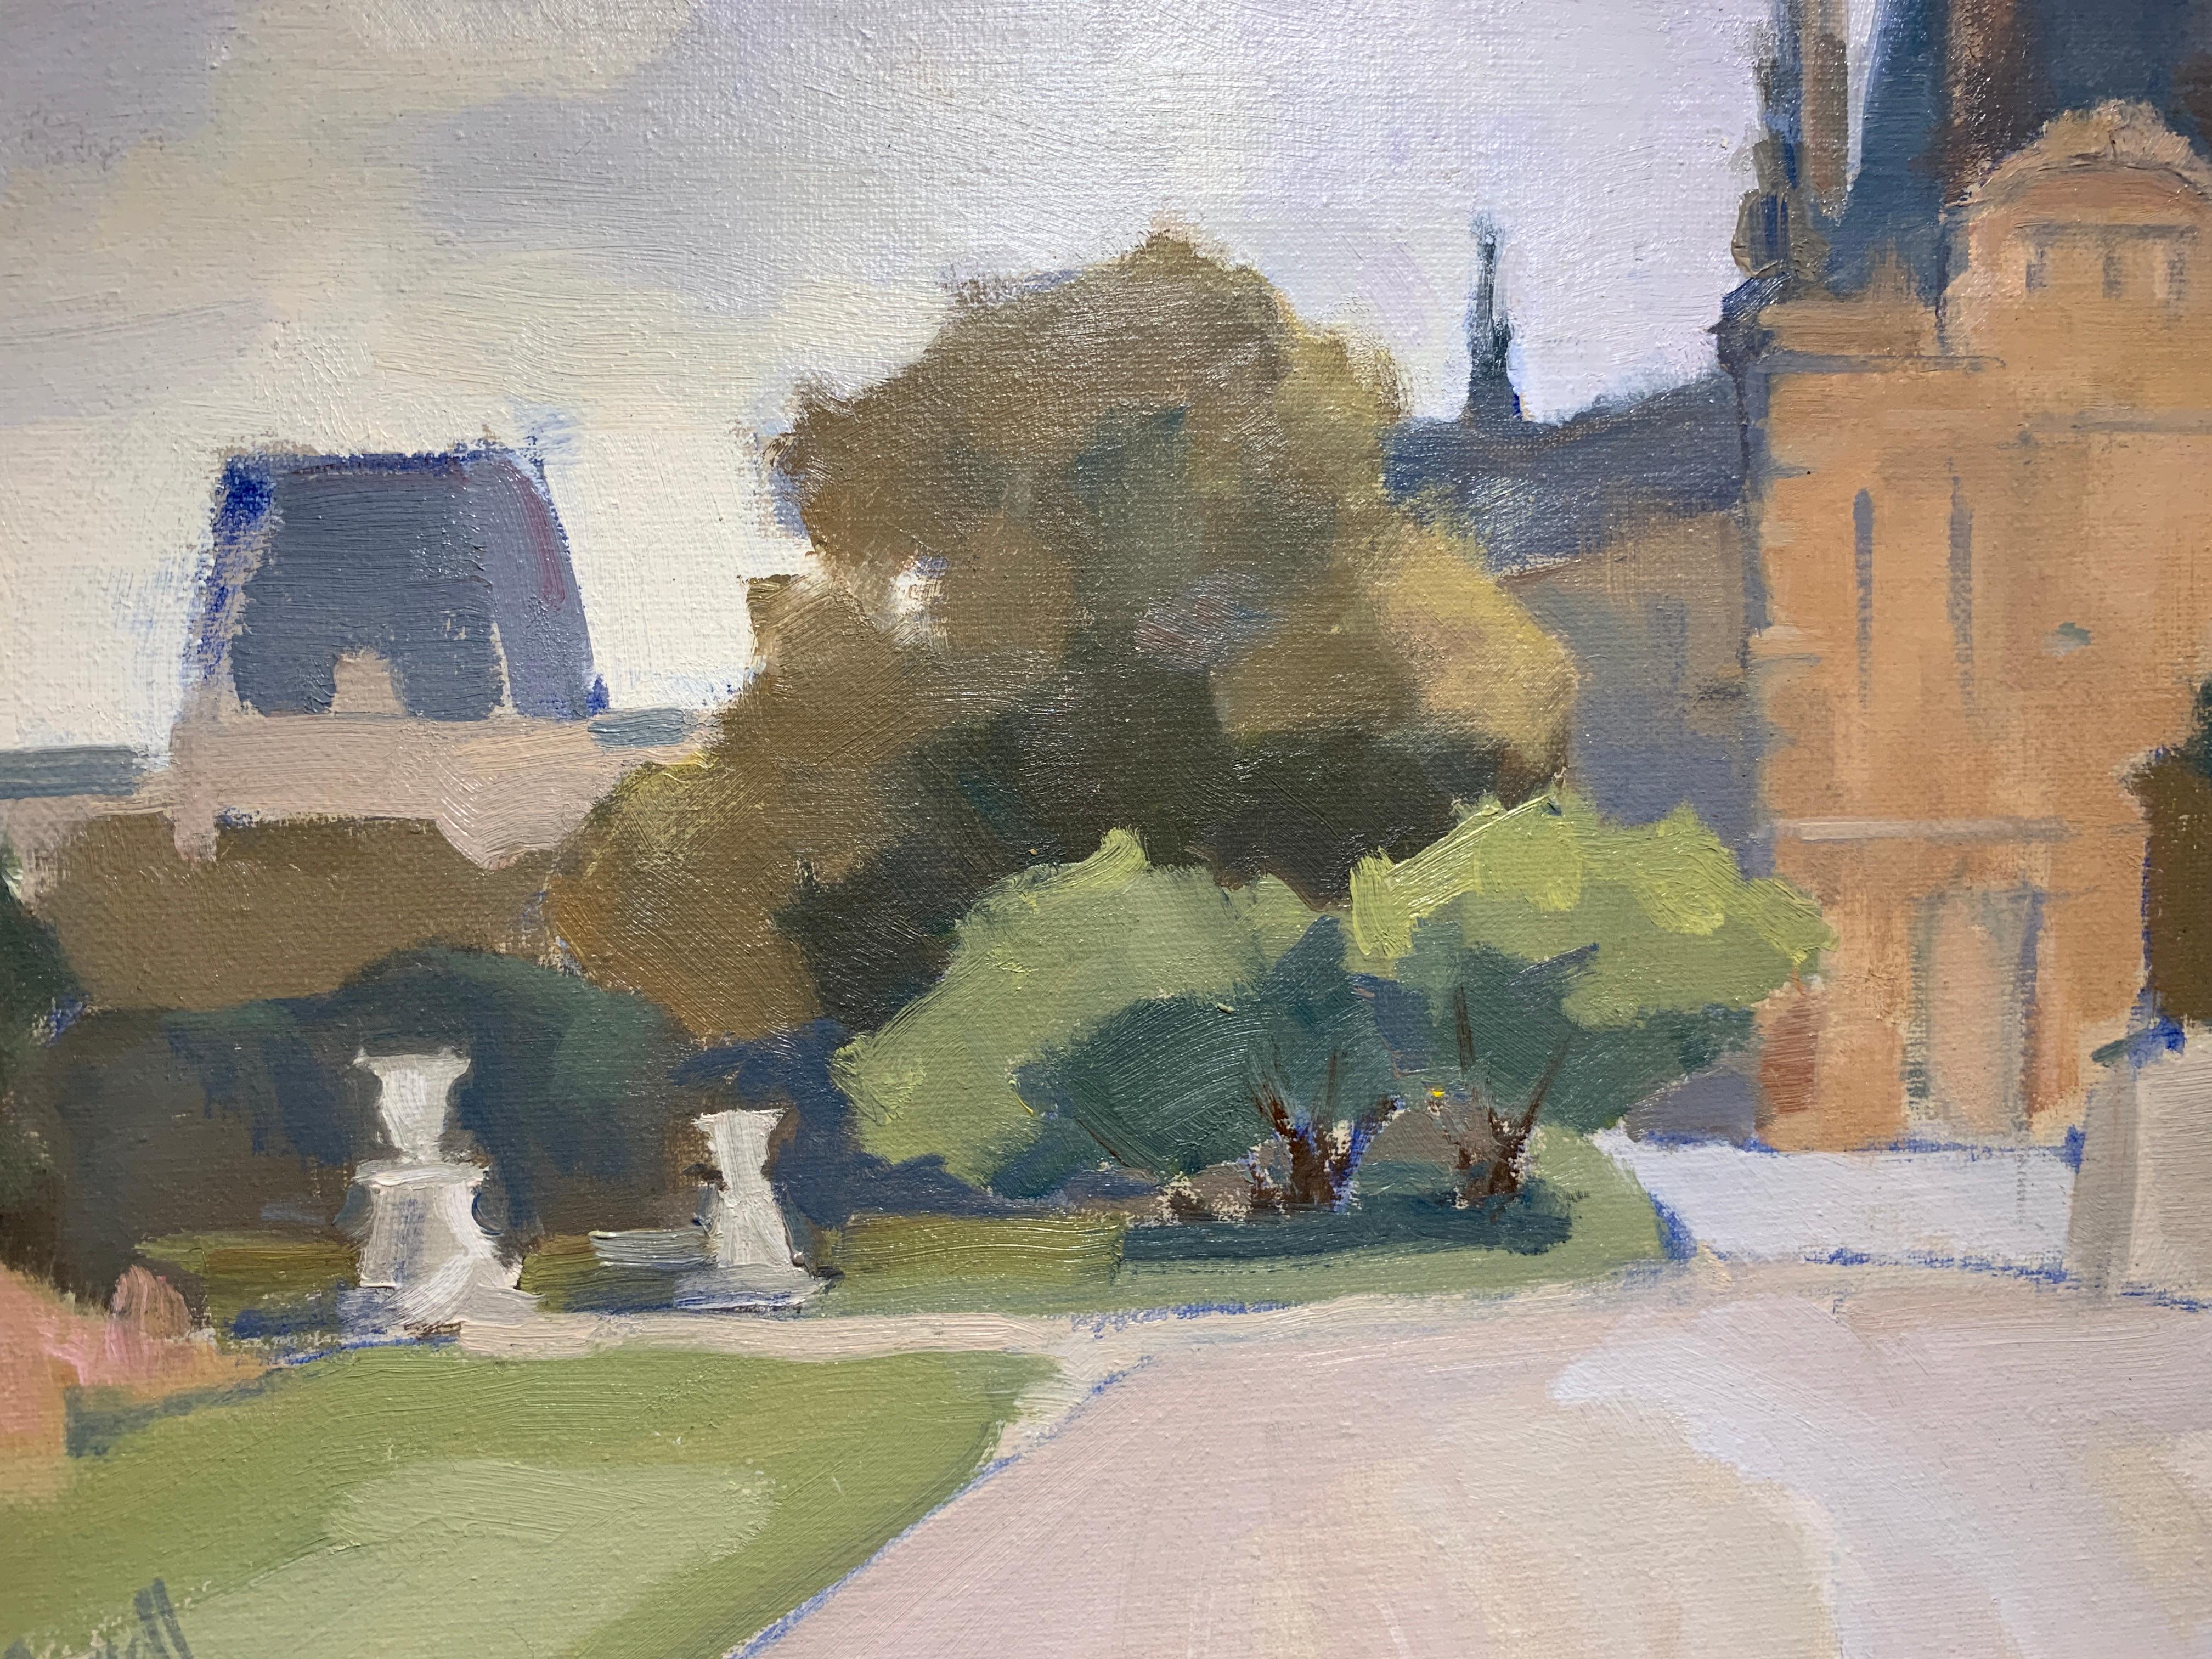 Louvre, from the Tuileries Lesley Powell Framed Oil on Linen Landscape Painting 1